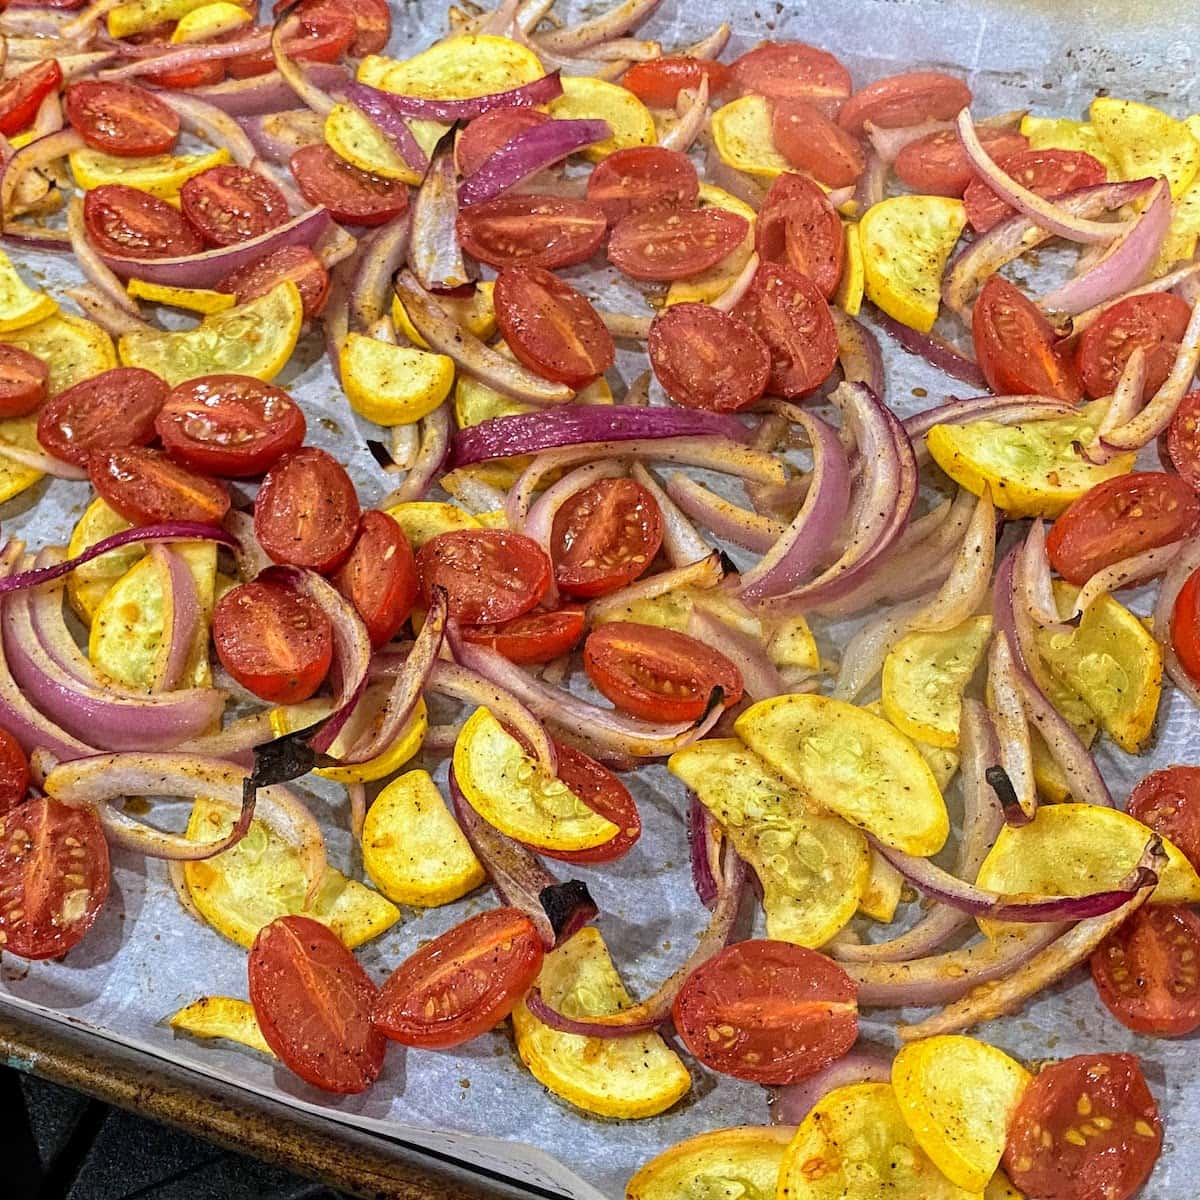 sheet pan full of roasted tomatoes, summer squash and red onion